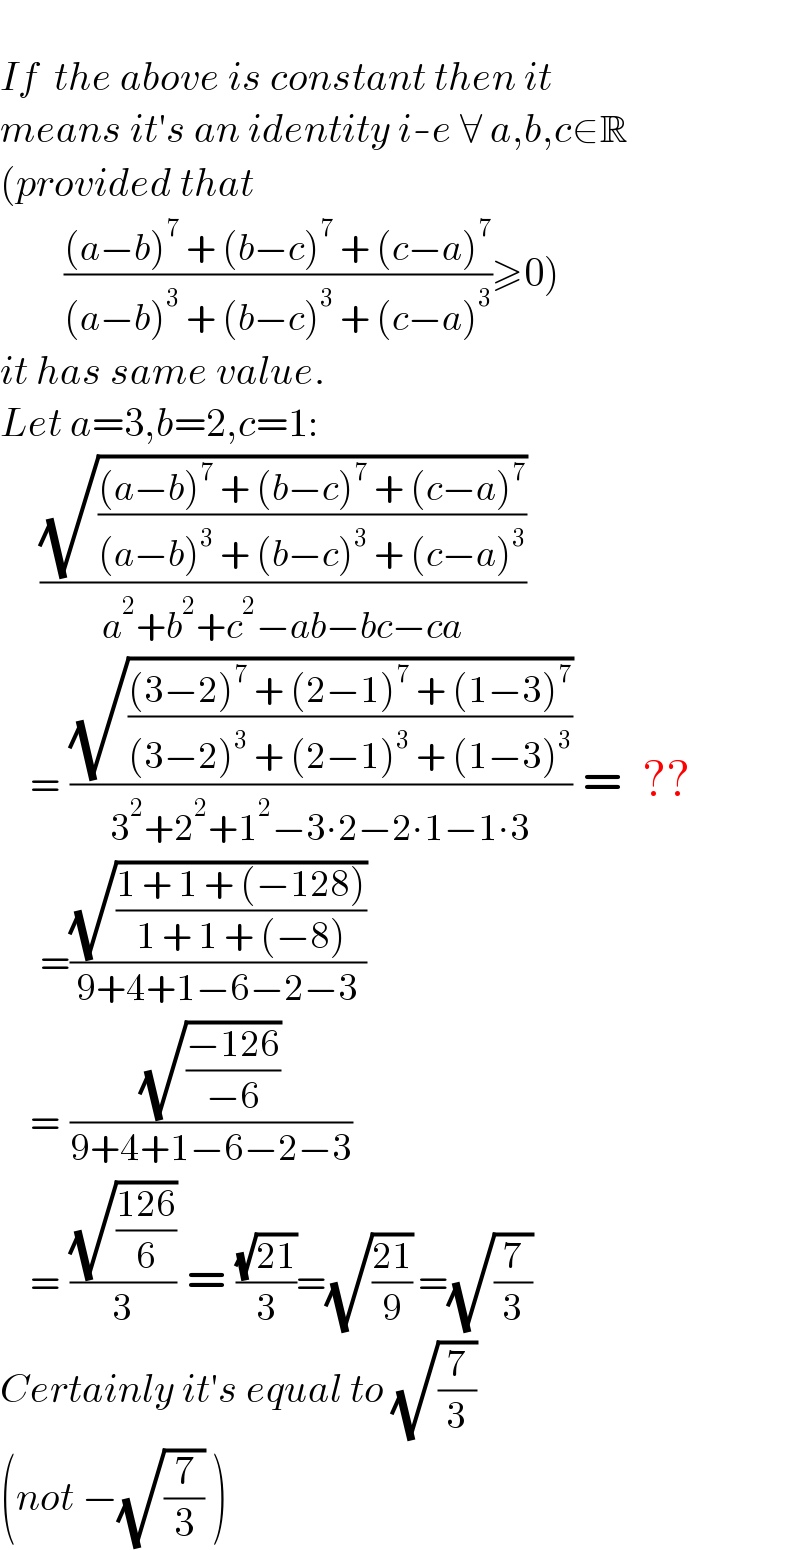   If  the above is constant then it  means it′s an identity i-e ∀ a,b,c∈R  (provided that          (((a−b)^7  + (b−c)^7  + (c−a)^7 )/((a−b)^3  + (b−c)^3  + (c−a)^3 ))≥0)  it has same value.  Let a=3,b=2,c=1:      ((√(((a−b)^7  + (b−c)^7  + (c−a)^7 )/((a−b)^3  + (b−c)^3  + (c−a)^3 )))/(a^2 +b^2 +c^2 −ab−bc−ca))      = ((√(((3−2)^7  + (2−1)^7  + (1−3)^7 )/((3−2)^3  + (2−1)^3  + (1−3)^3 )))/(3^2 +2^2 +1^2 −3∙2−2∙1−1∙3)) =  ??      =((√((1 + 1 + (−128))/(1 + 1 + (−8))))/(9+4+1−6−2−3))      = ((√((−126)/(−6)))/(9+4+1−6−2−3))      = ((√((126)/6))/3) = ((√(21))/3)=(√((21)/9)) =(√(7/3))  Certainly it′s equal to (√(7/3))  (not −(√(7/3)) )  